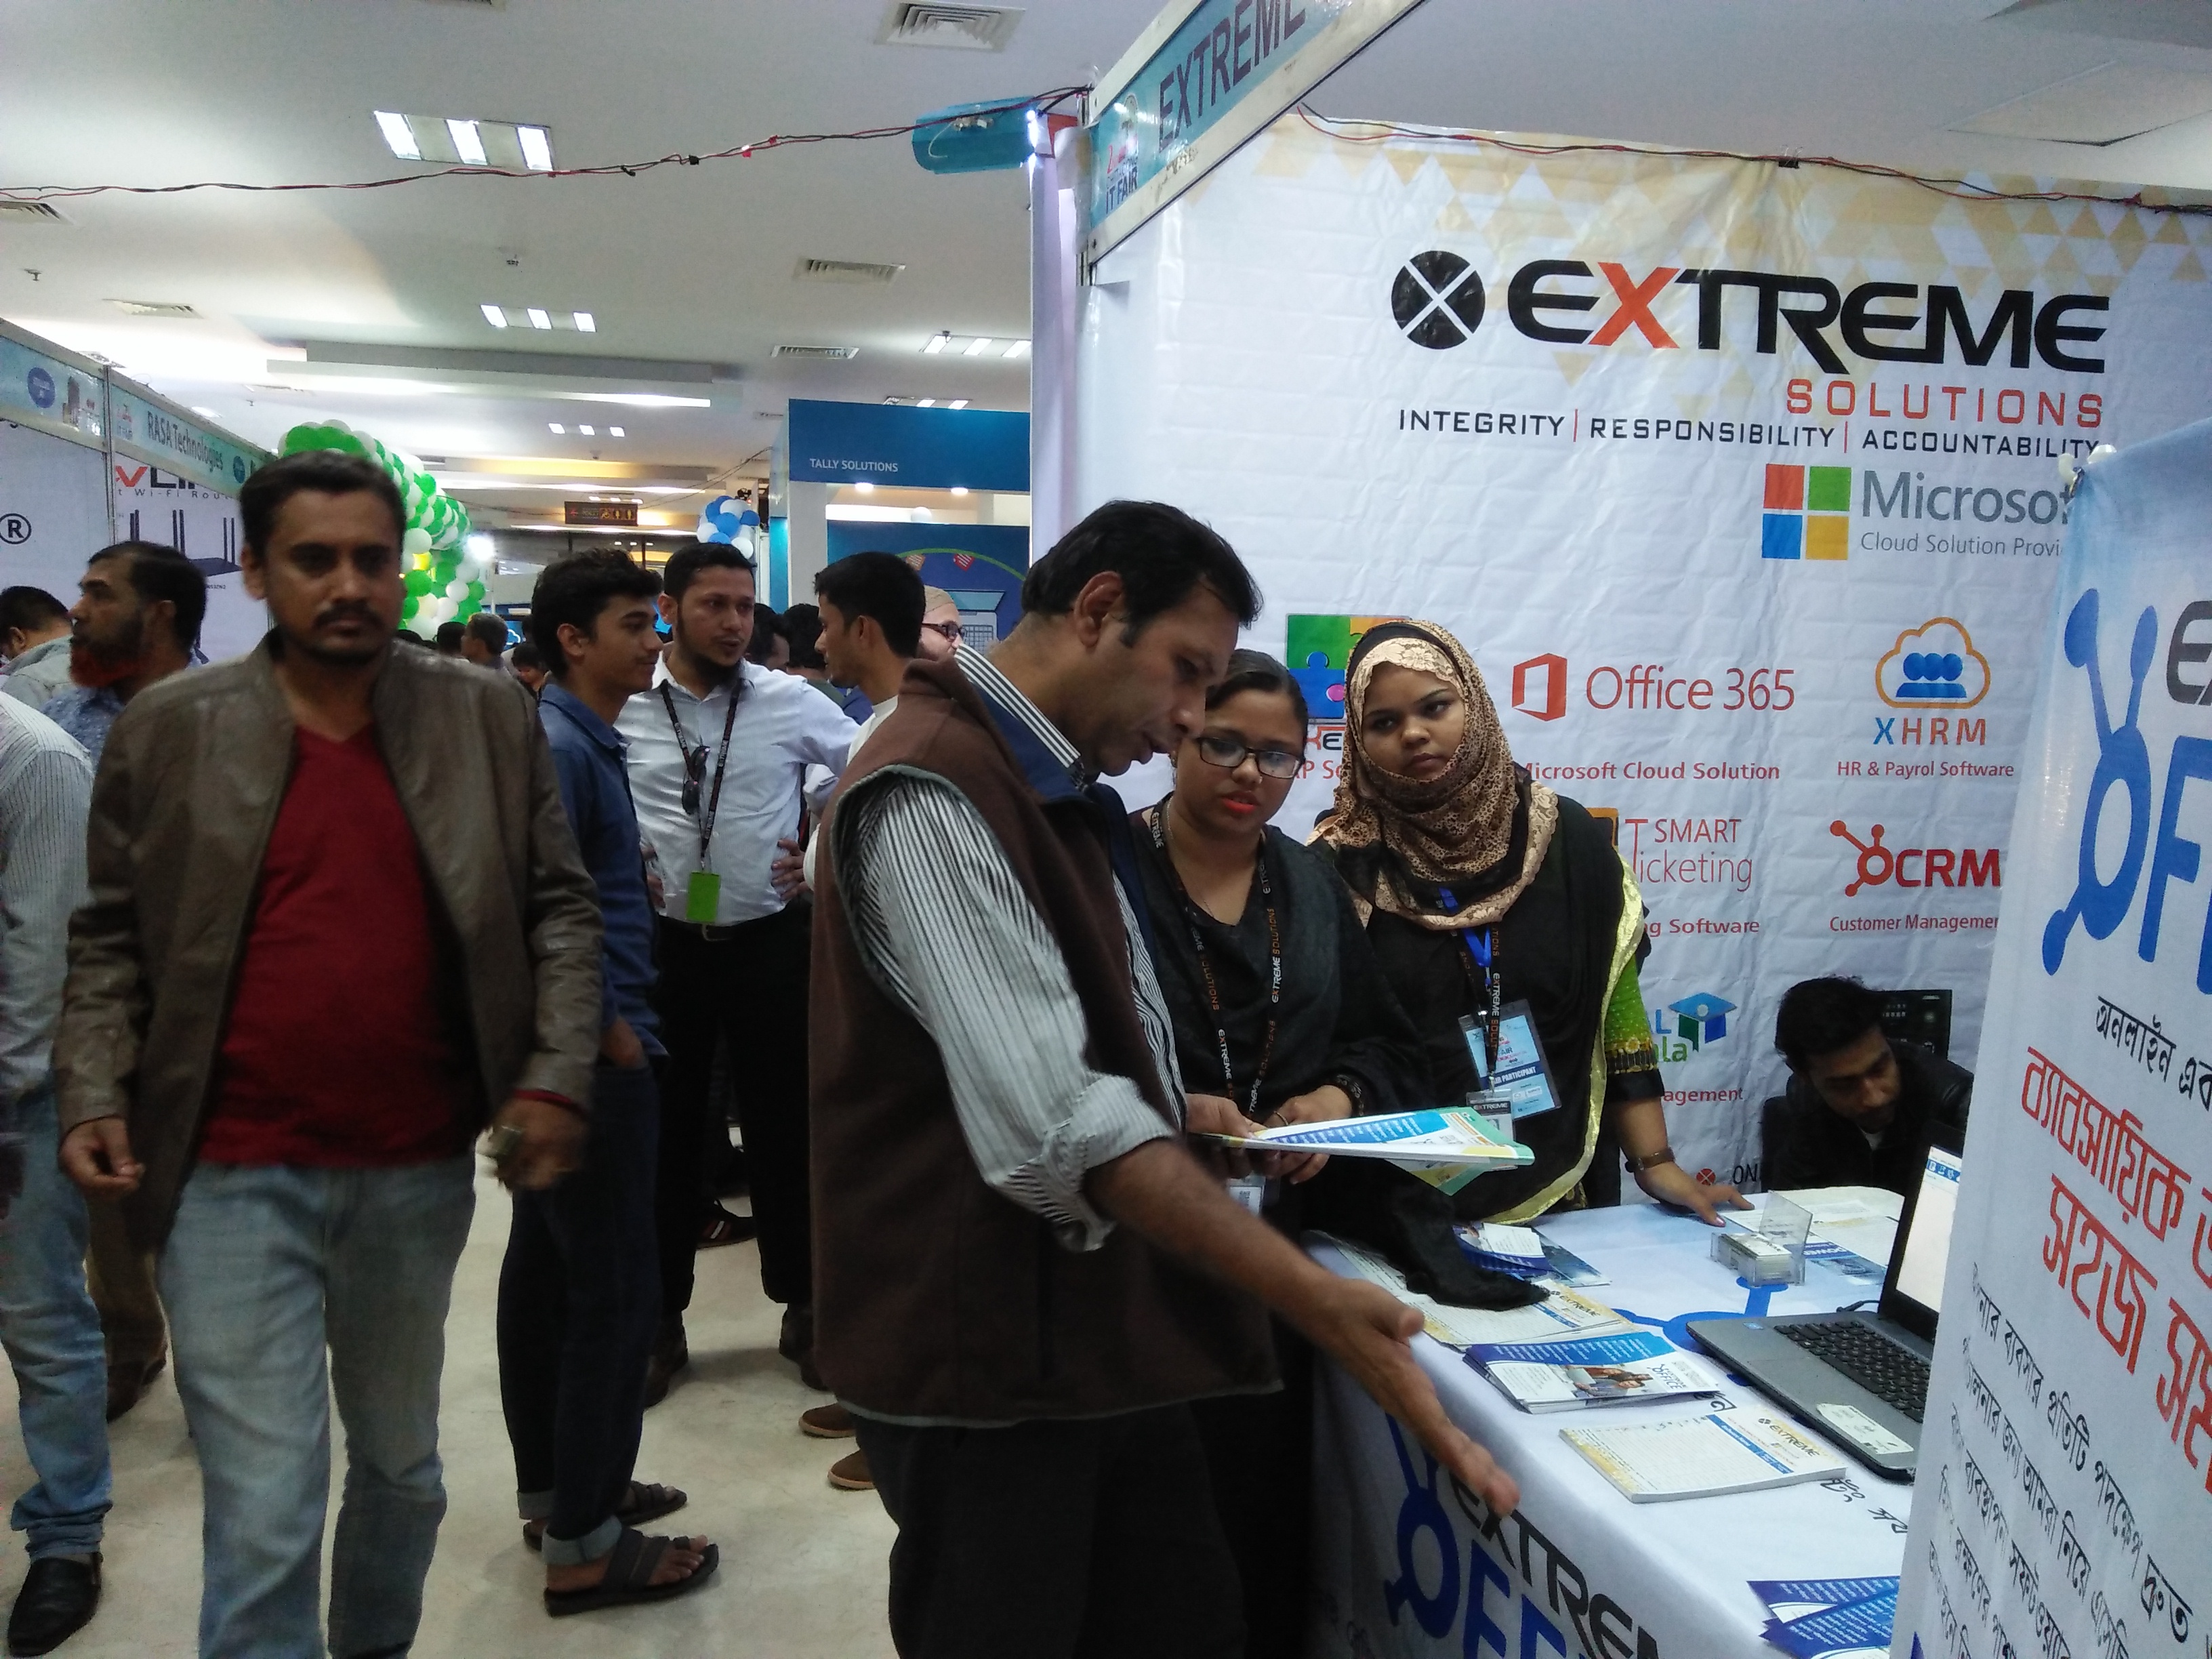 Chittagong IT Fair - Extreme Solutions